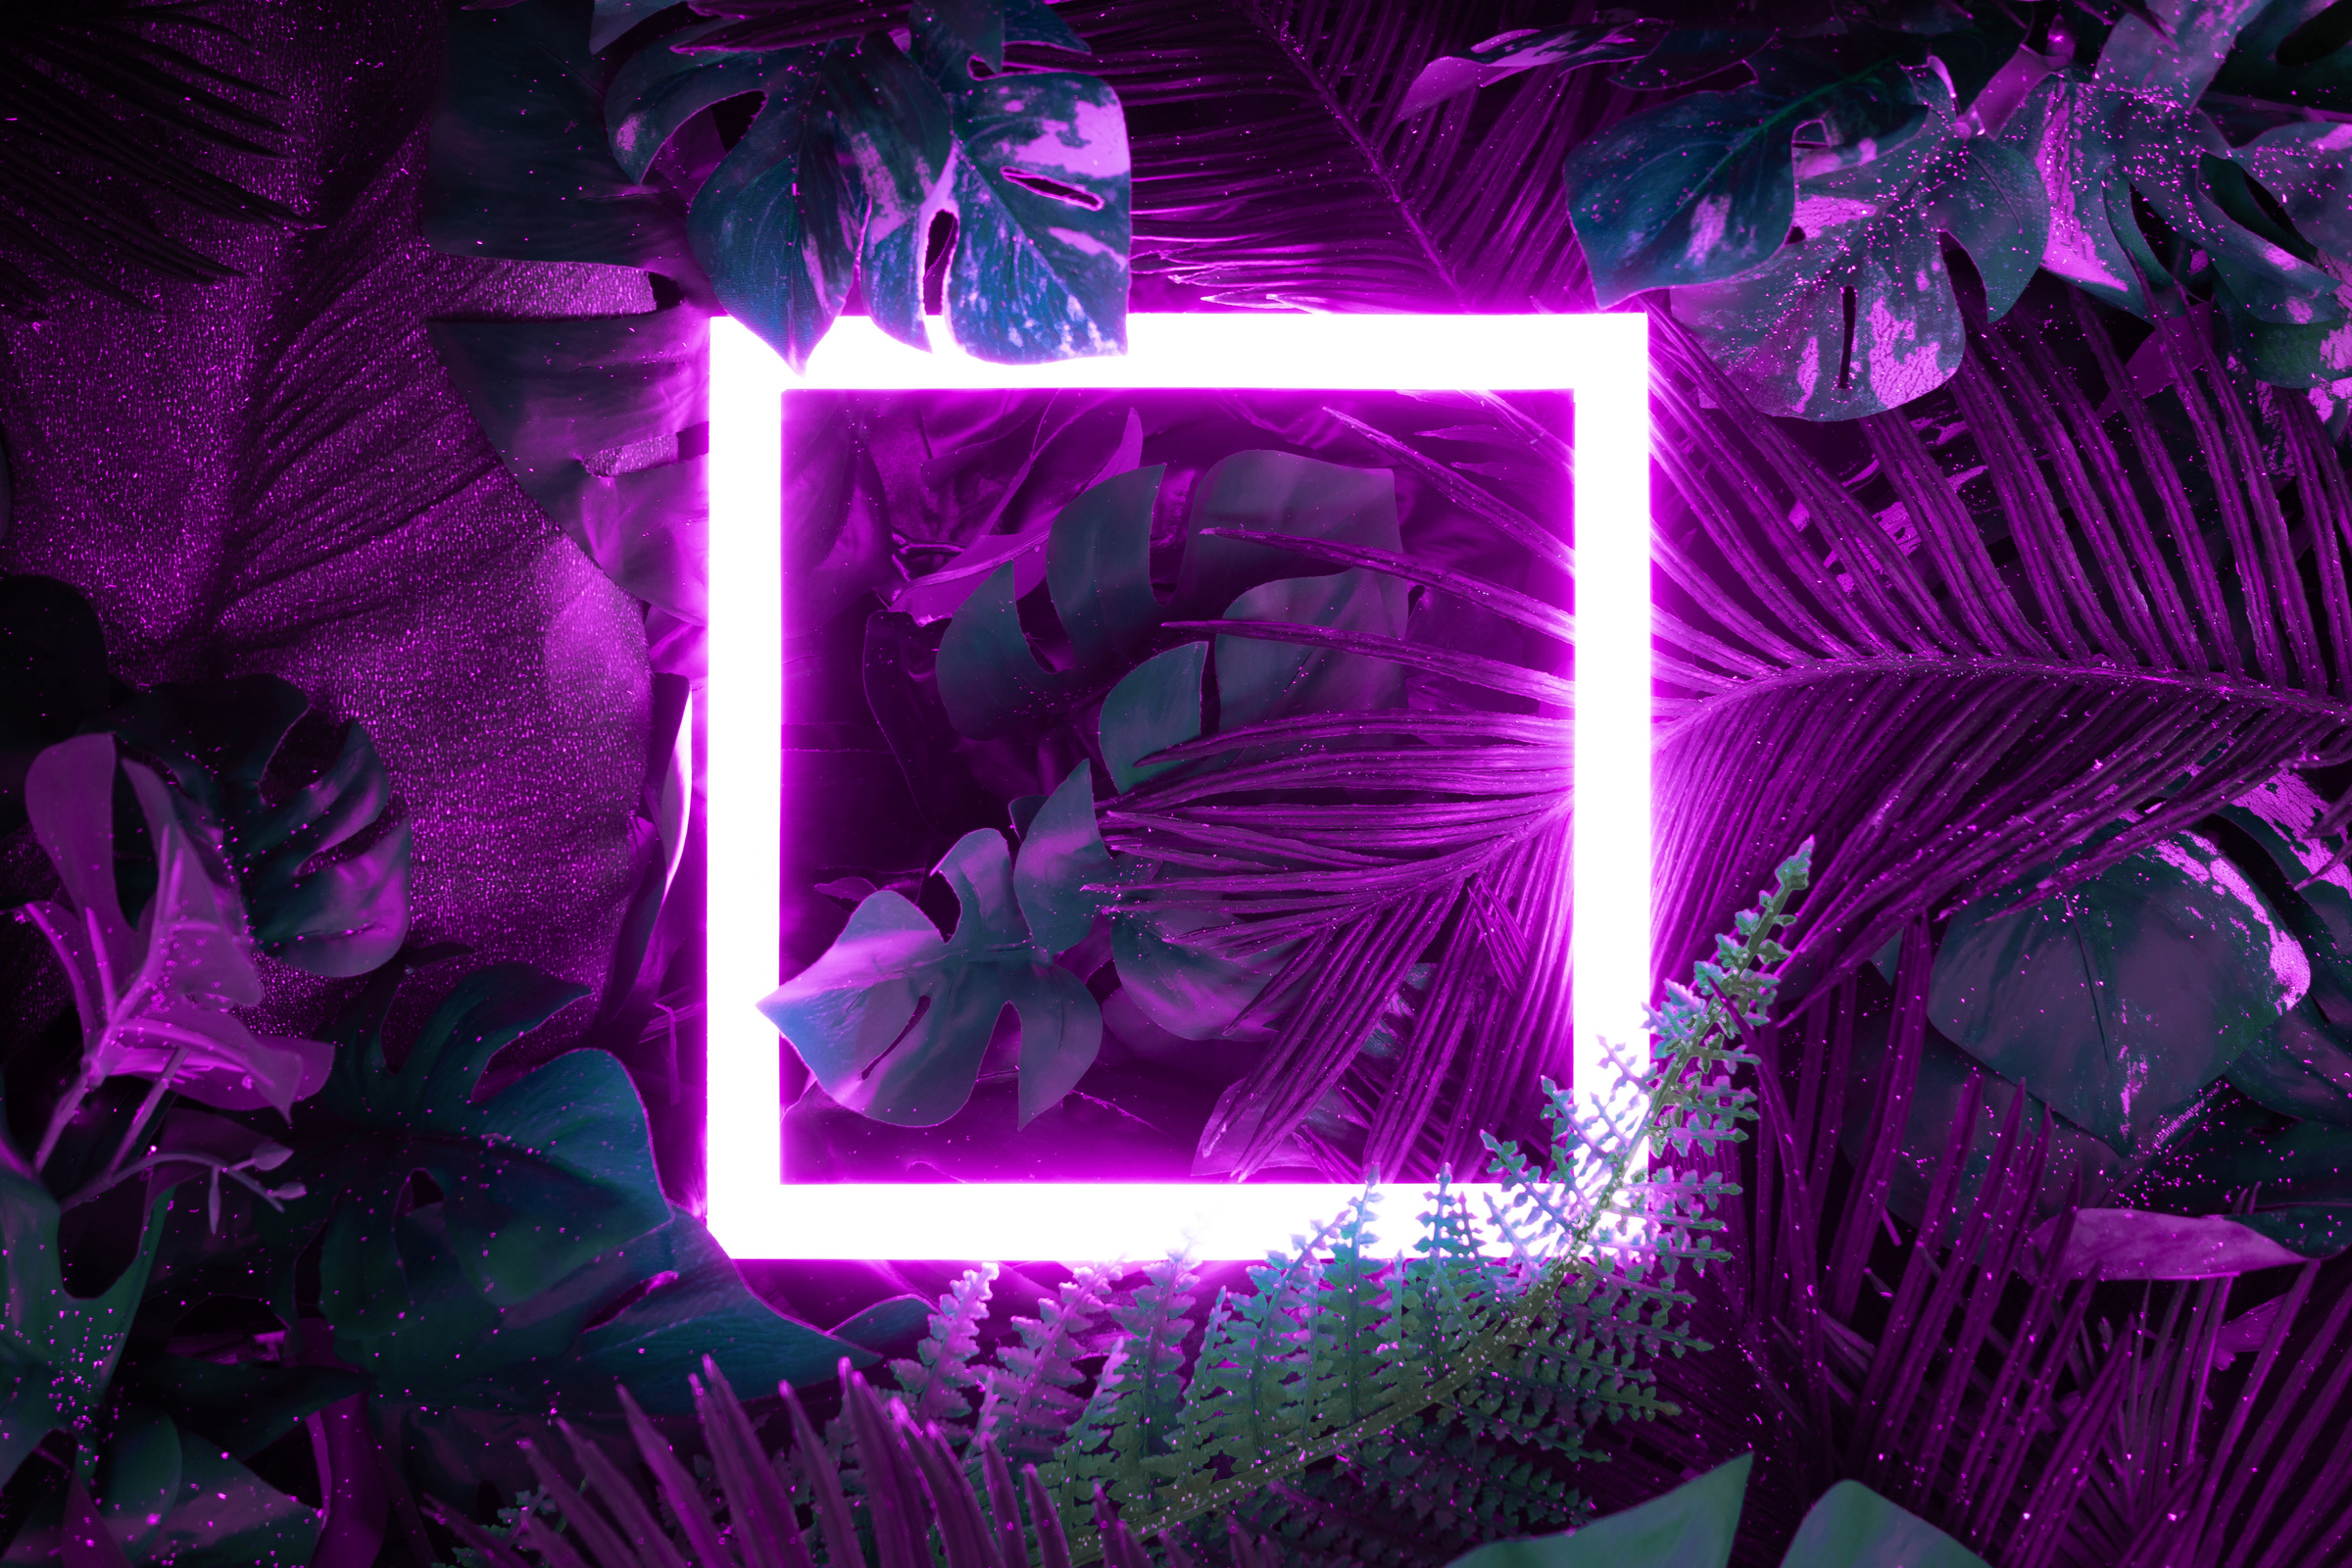 Creative fluorescent color layout made of tropical leaves with neon light square.